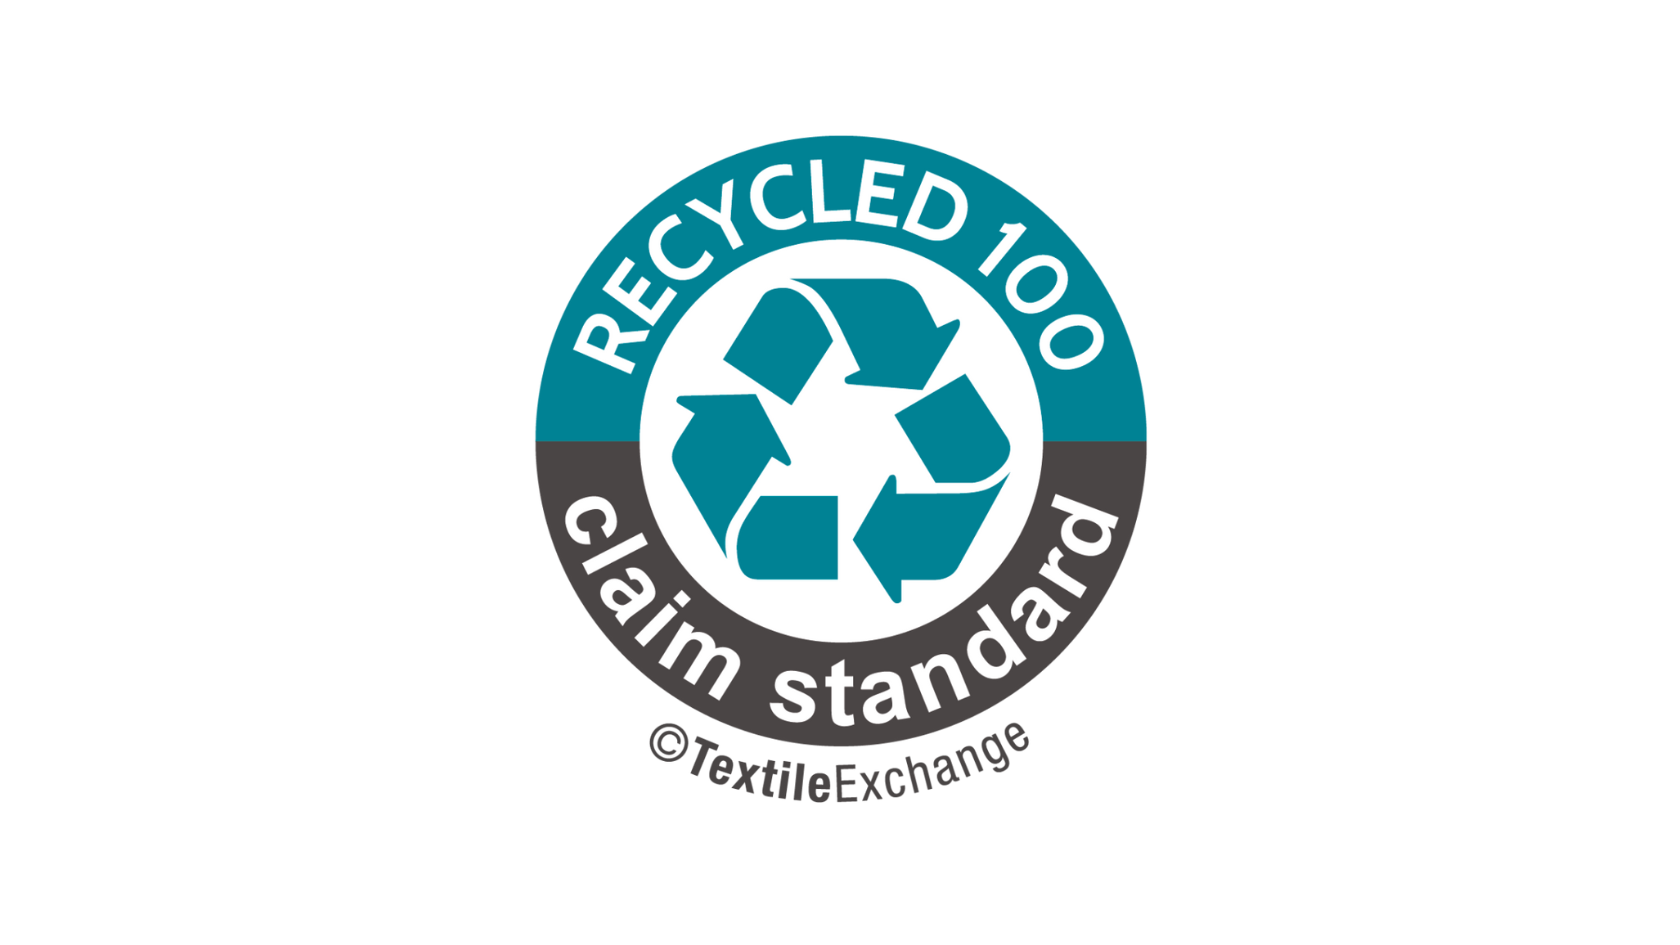 Recycled Claim Standard (RCS) by Textile Exchange